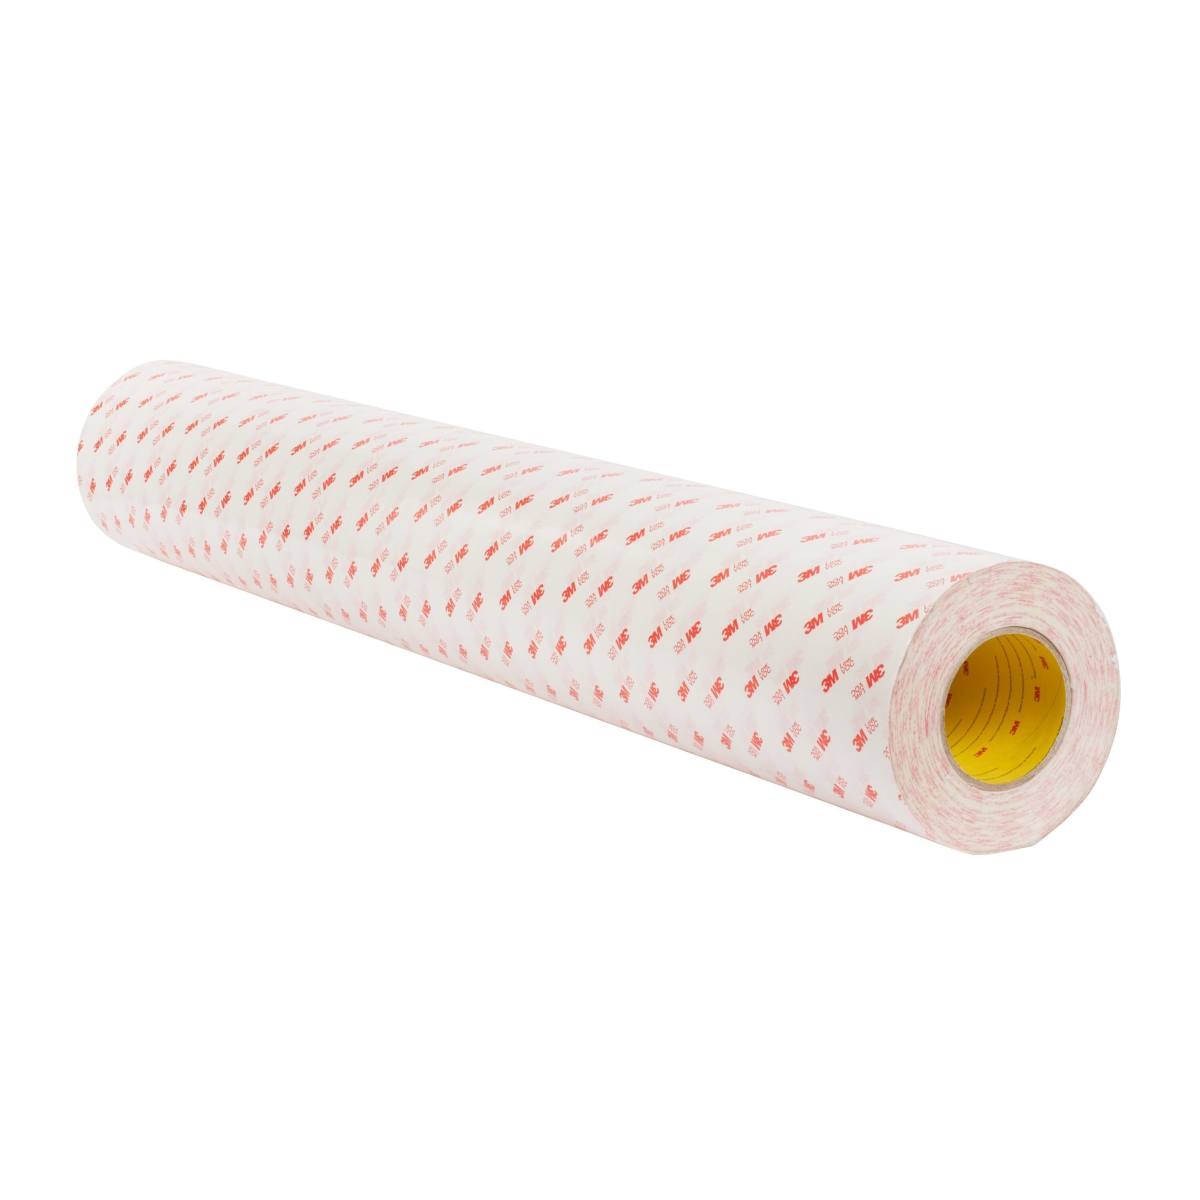 3M Double-sided adhesive tape with non-woven paper backing 99015LVC, white, 30 mm x 50 m, 0.15 mm